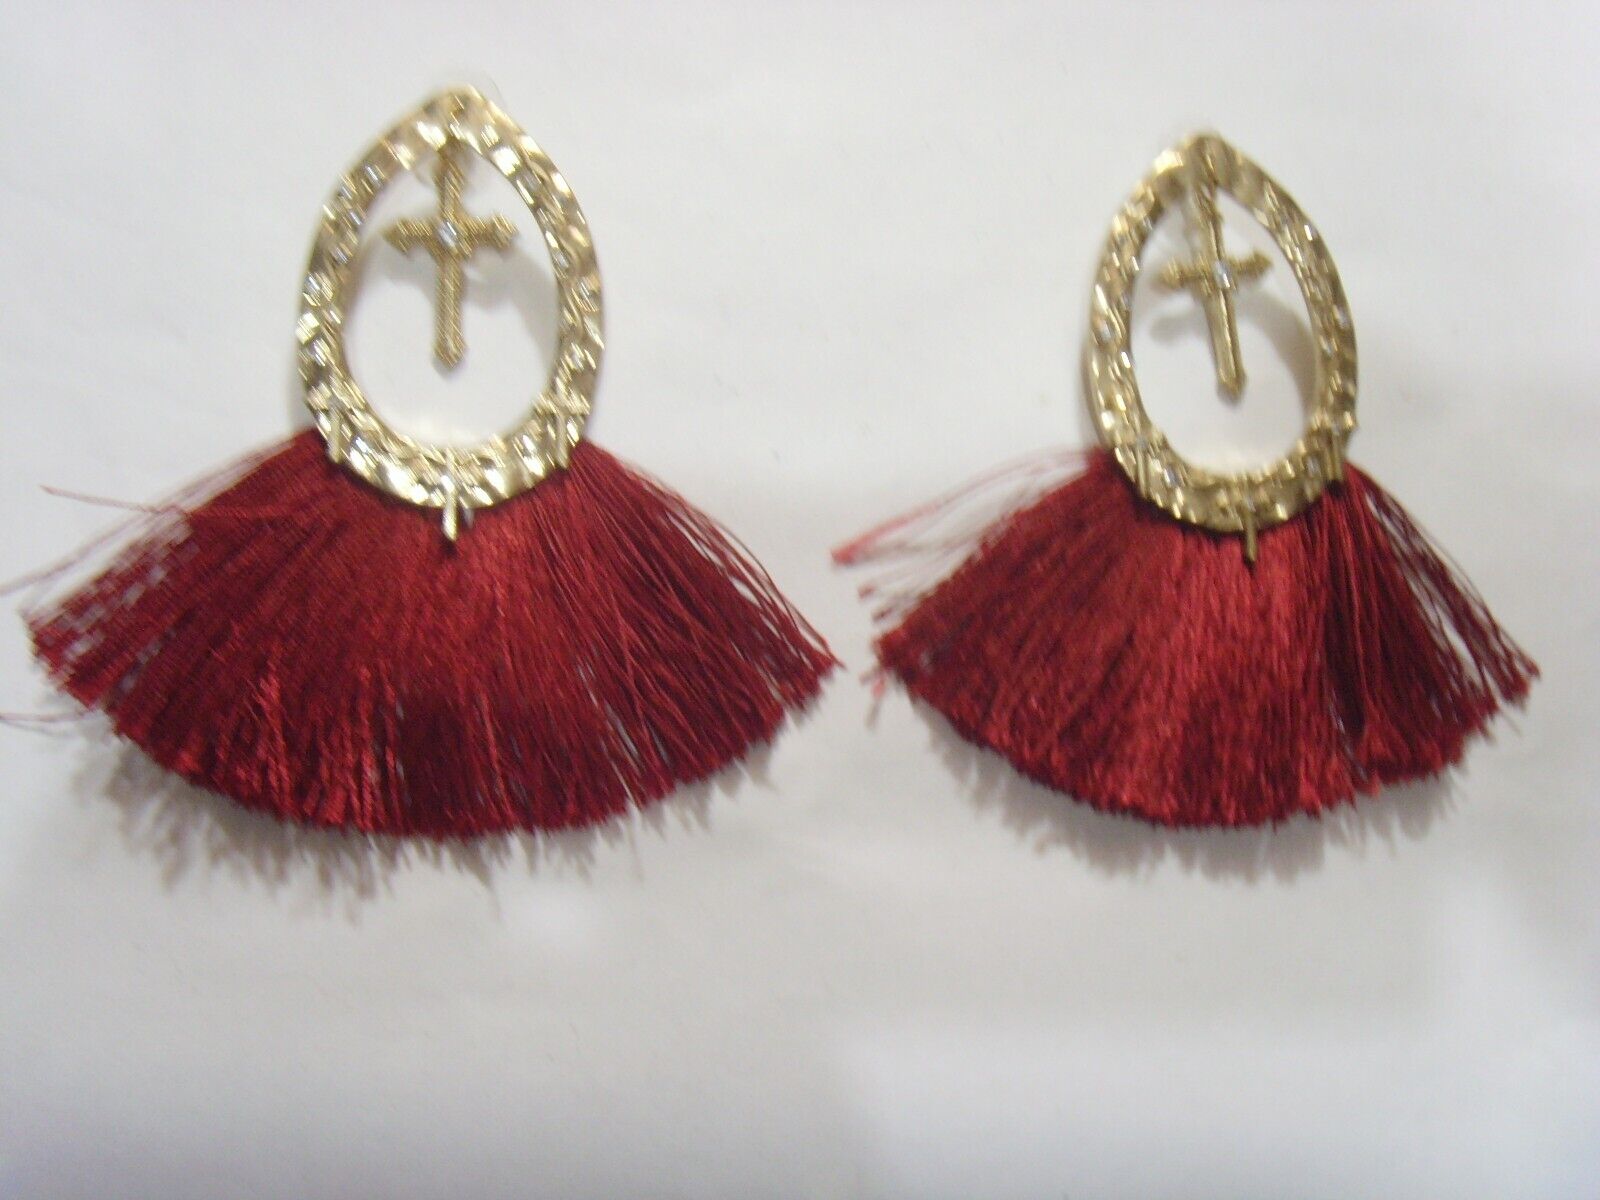 vintage gold tone metal cross and woven tassel earrings diamante accents FC1305